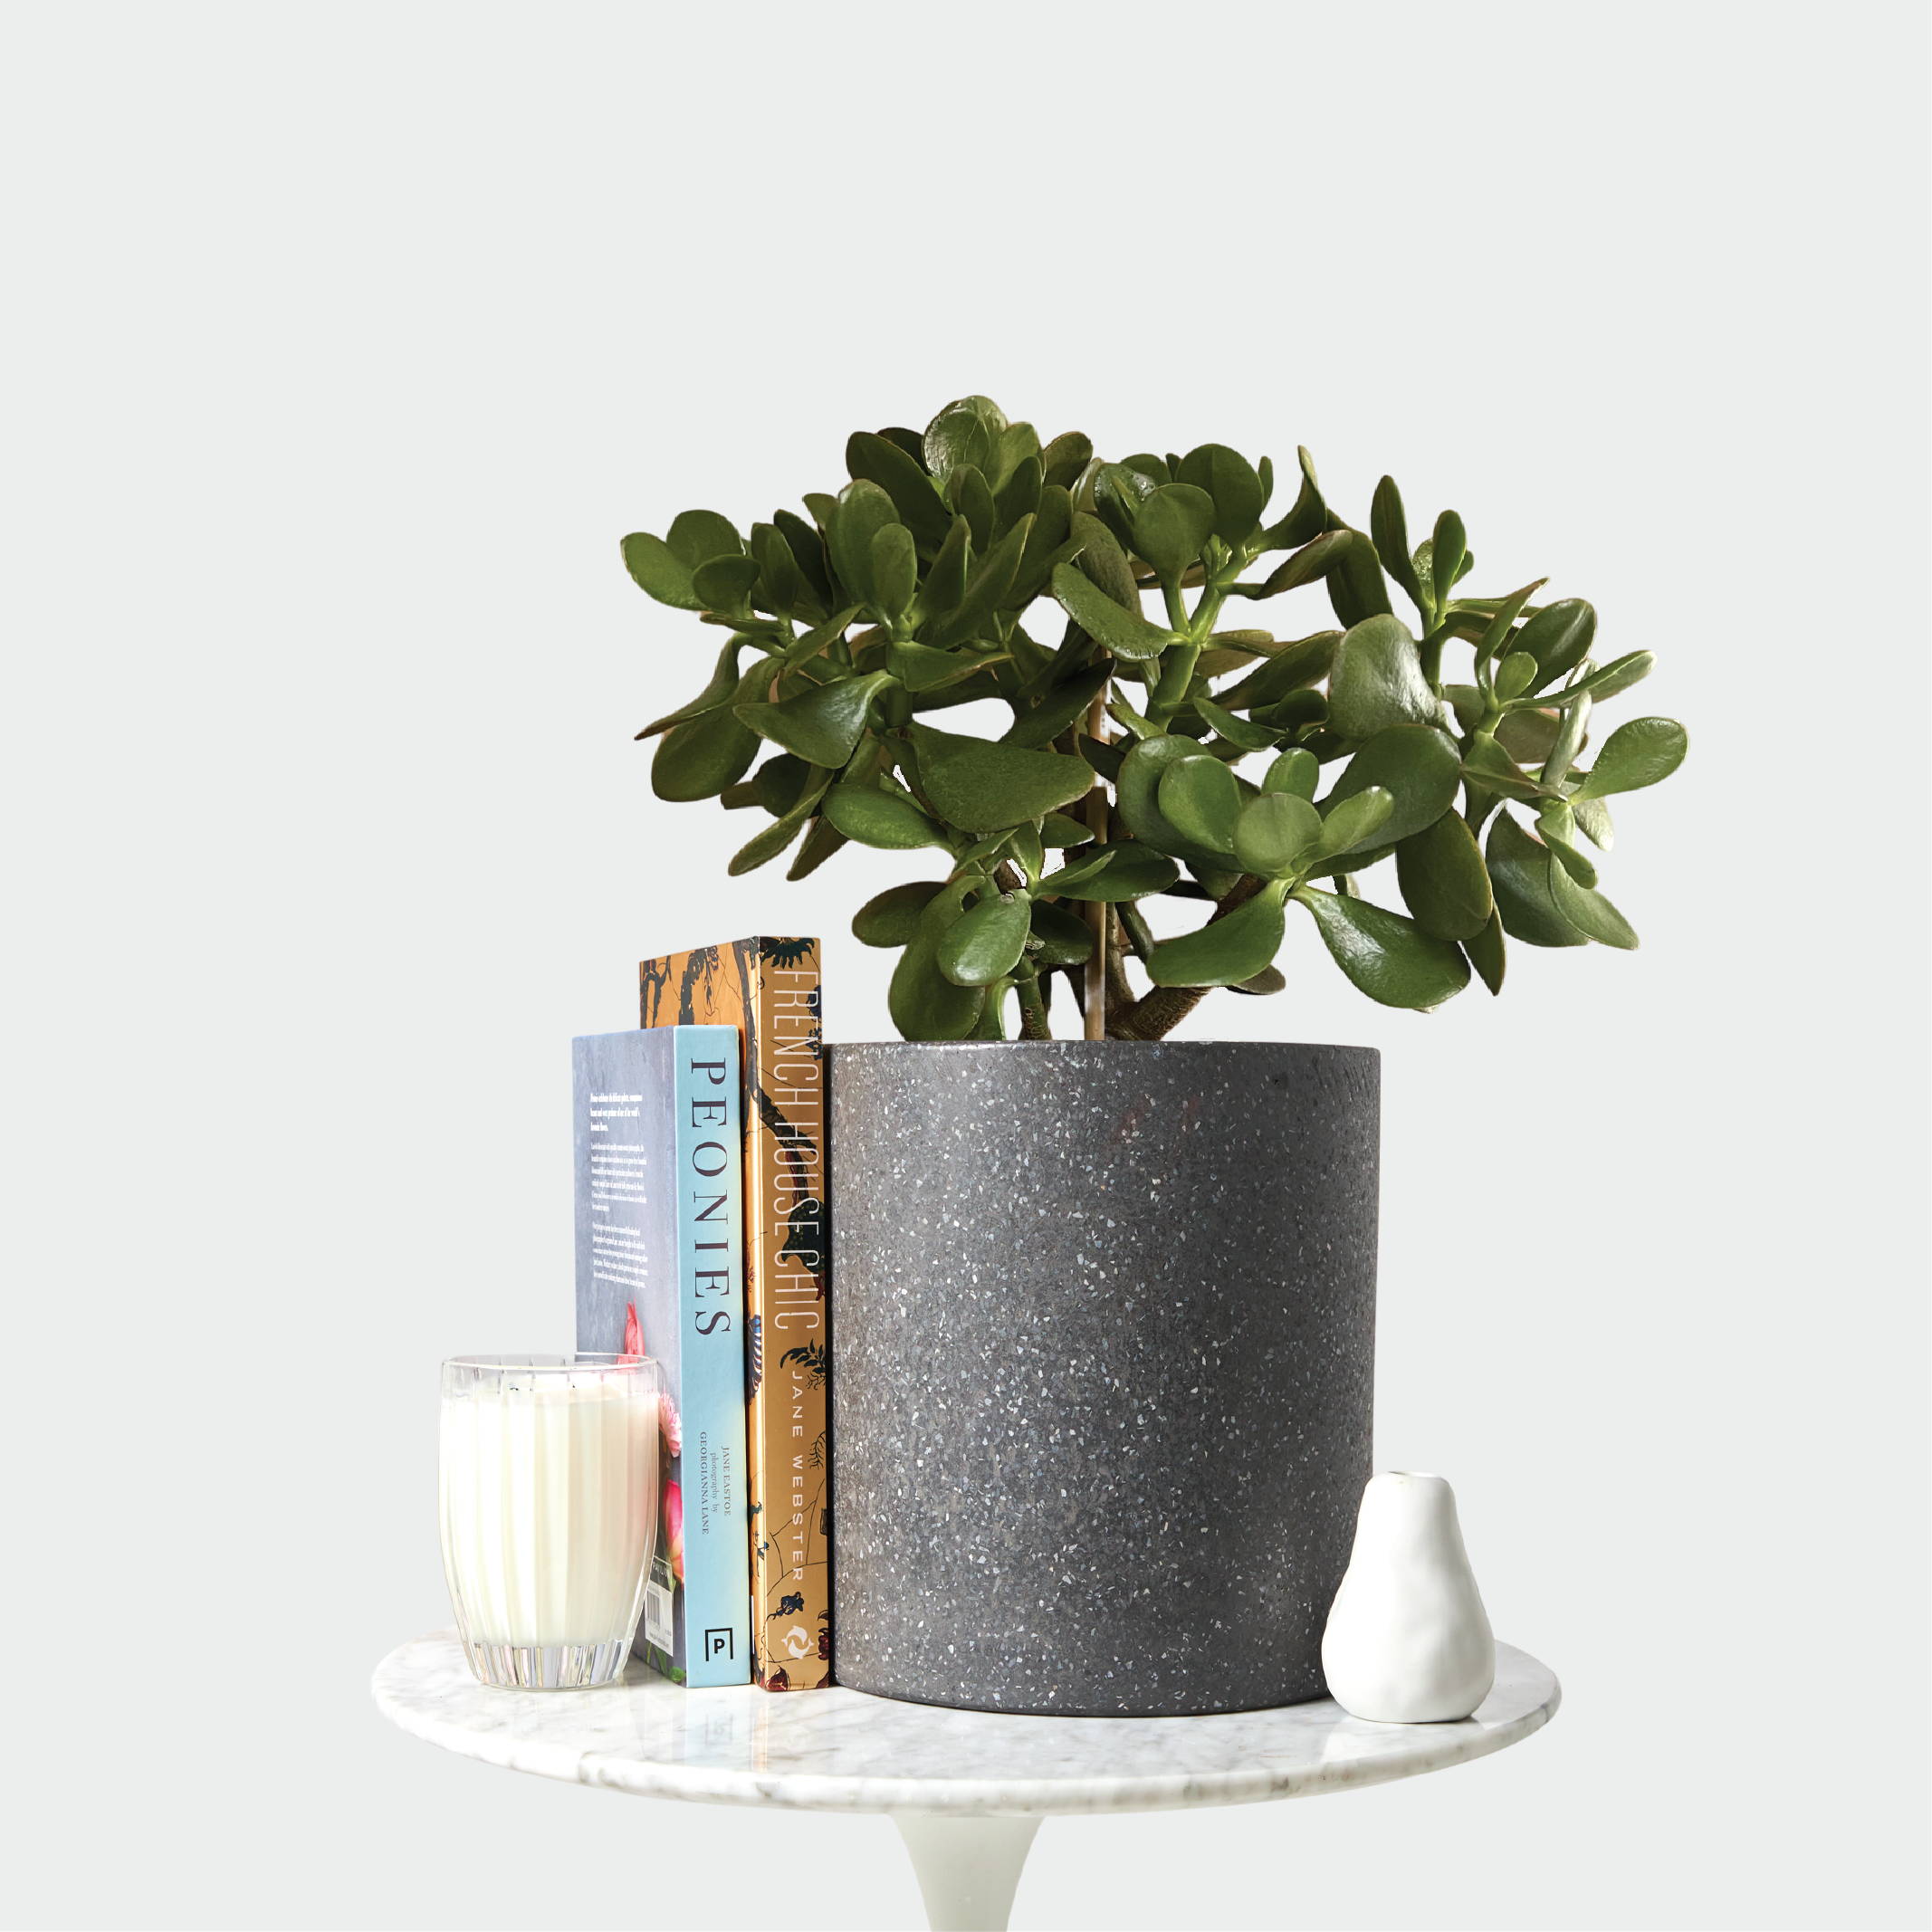 Jade Plant and accessories from The Good Plant Co